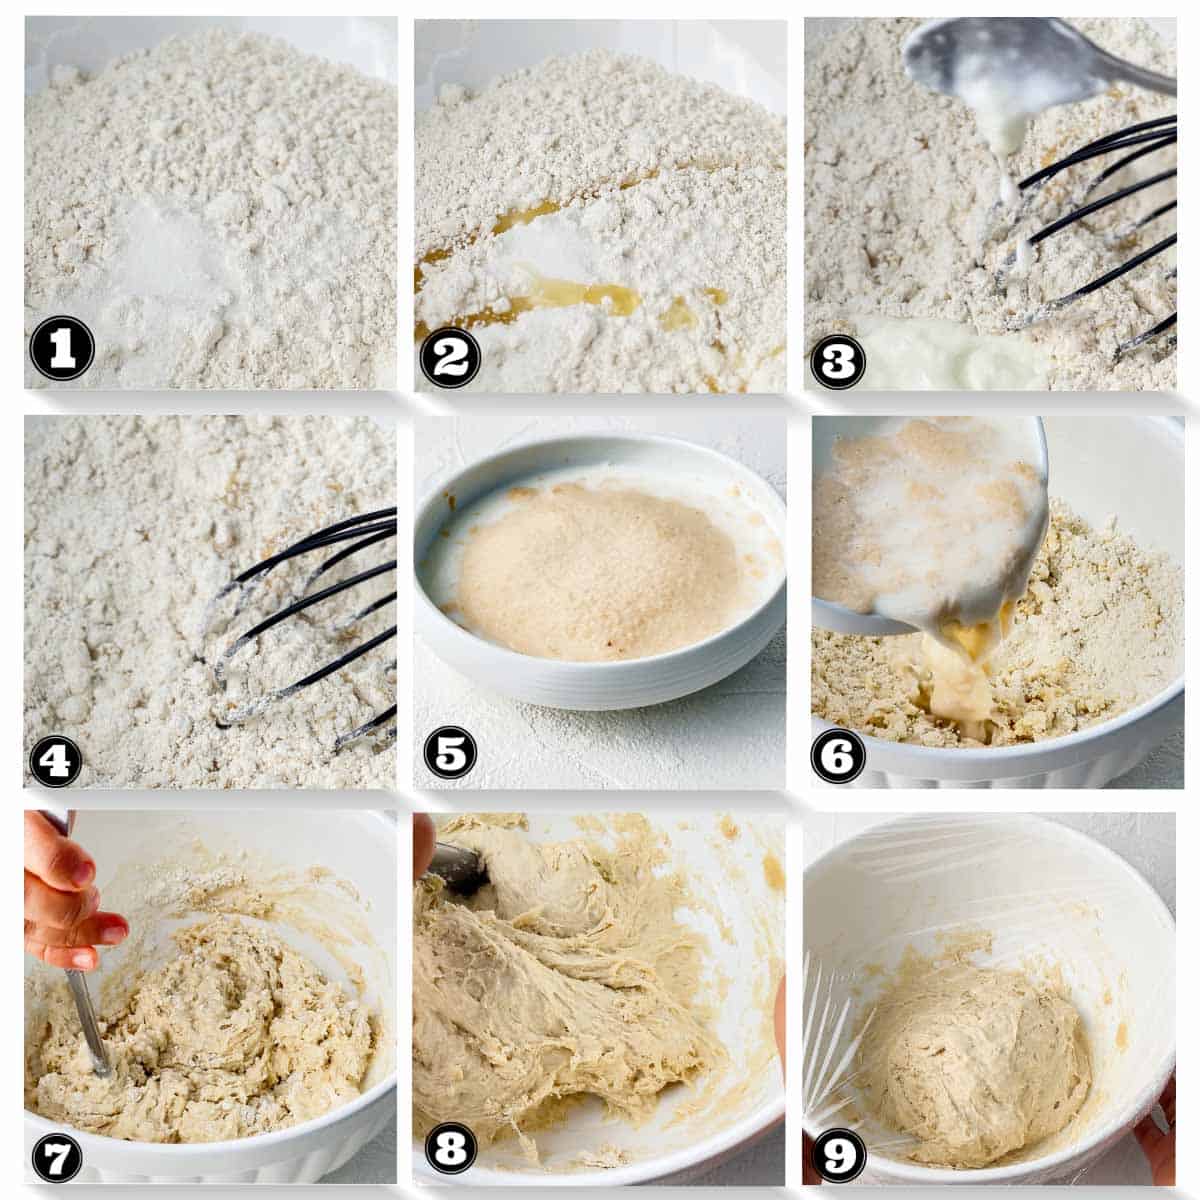 9 images made into a collage that shows the step by step images of making dough fro naan